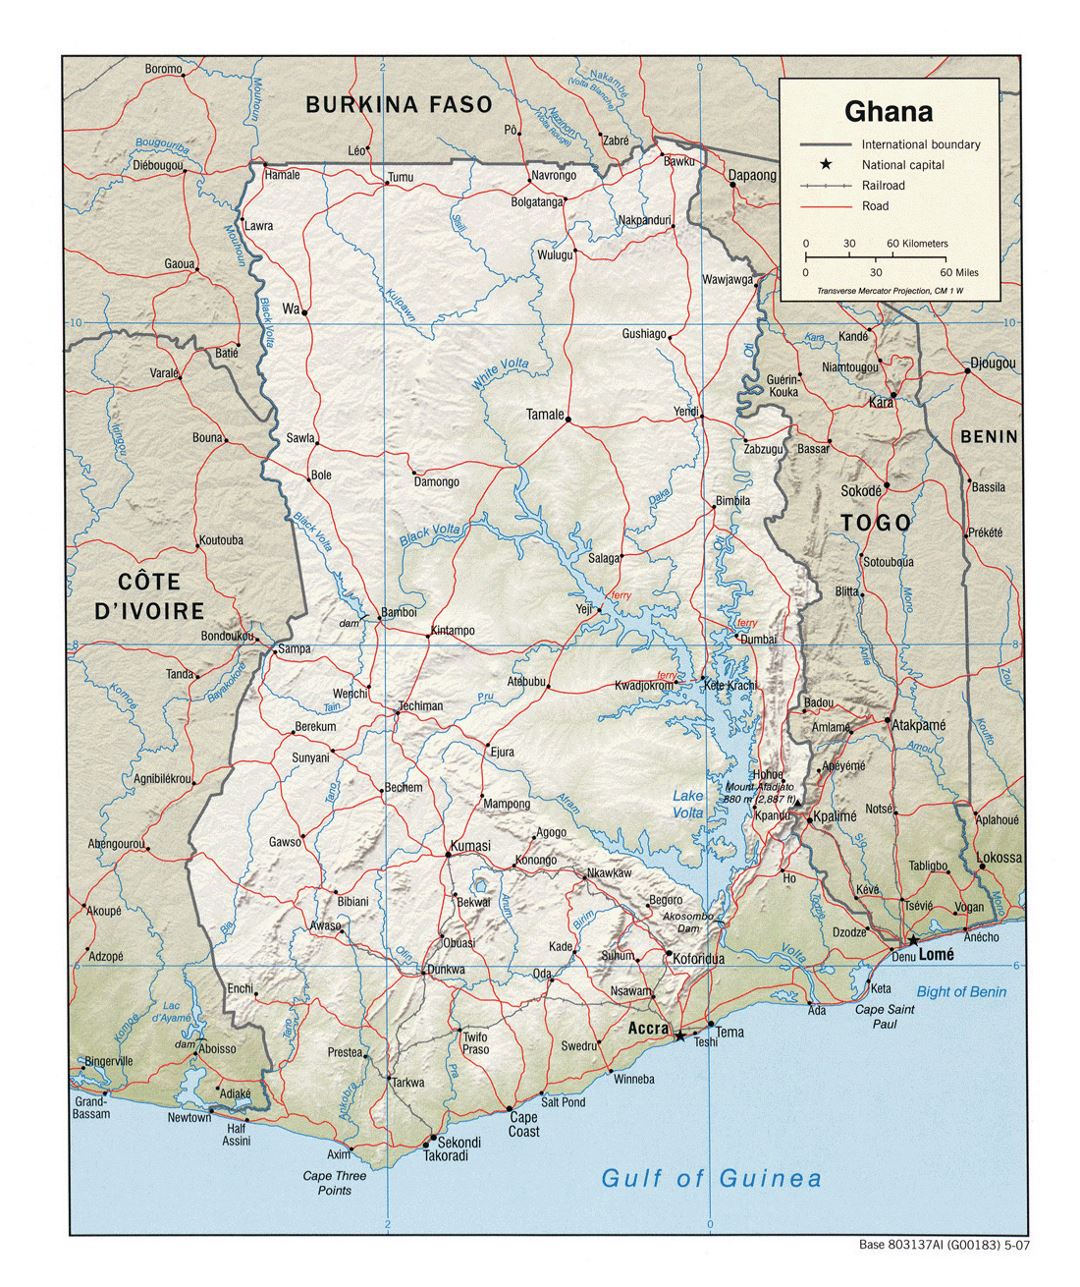 Detailed political map of Ghana with relief, roads, railroads and cities - 2007